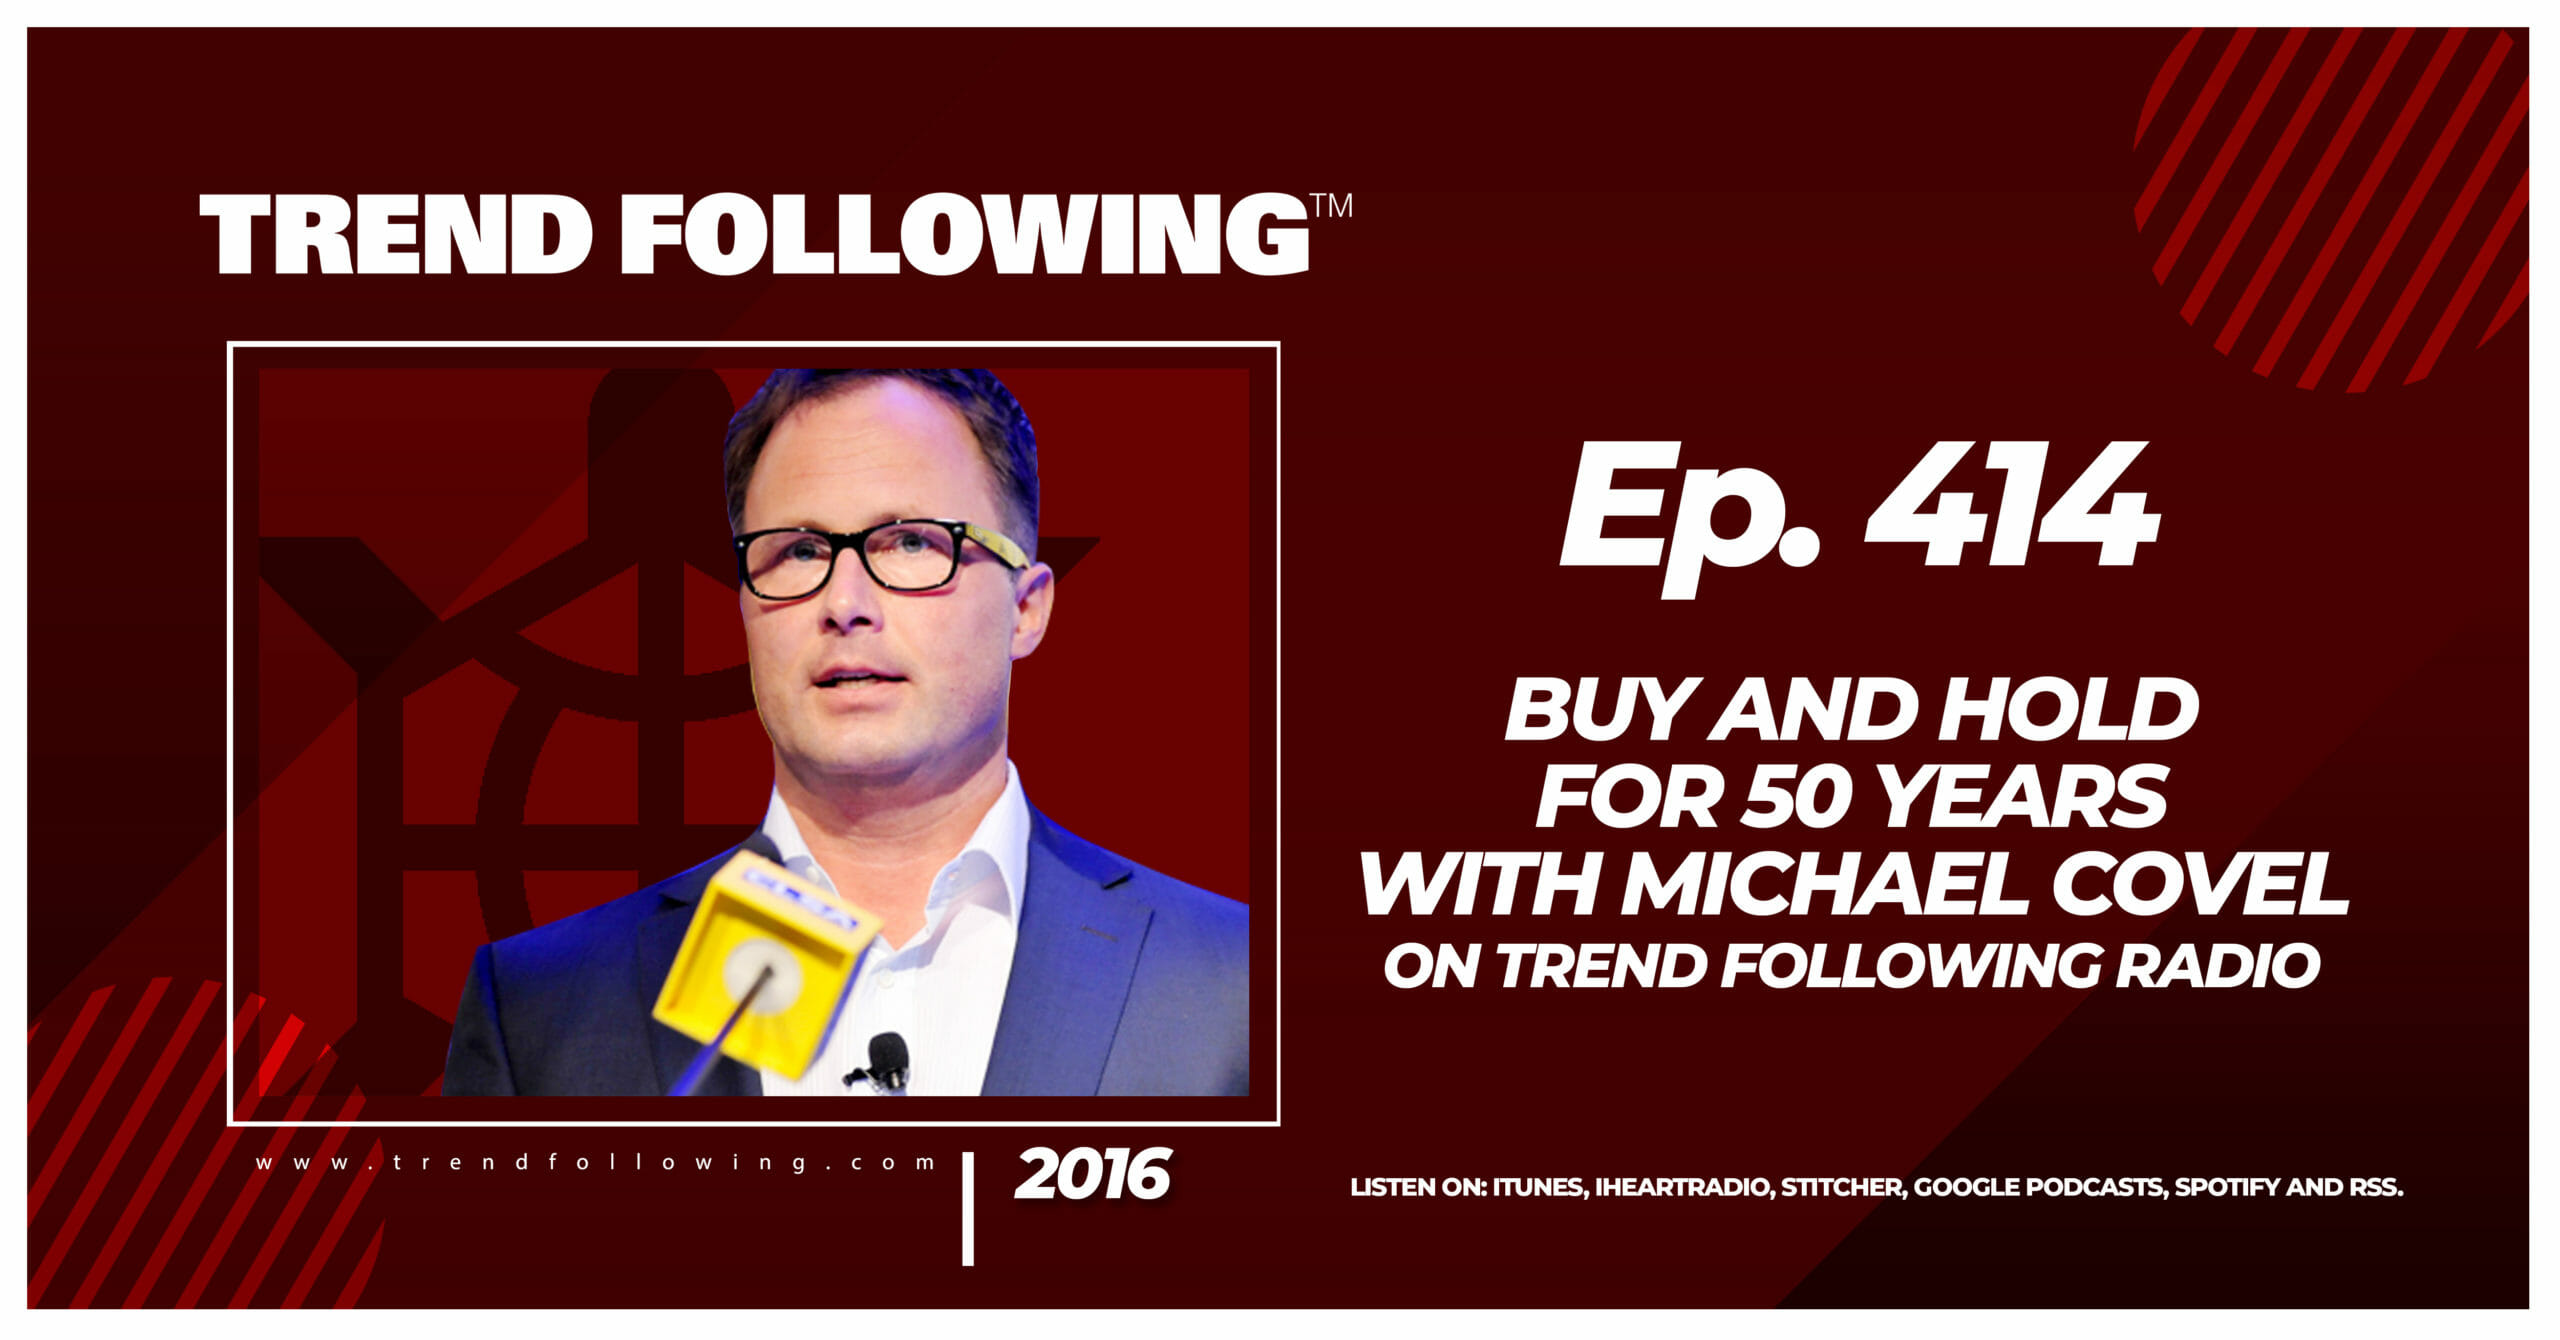 Buy and Hold for 50 Years with Michael Covel on Trend Following Radio